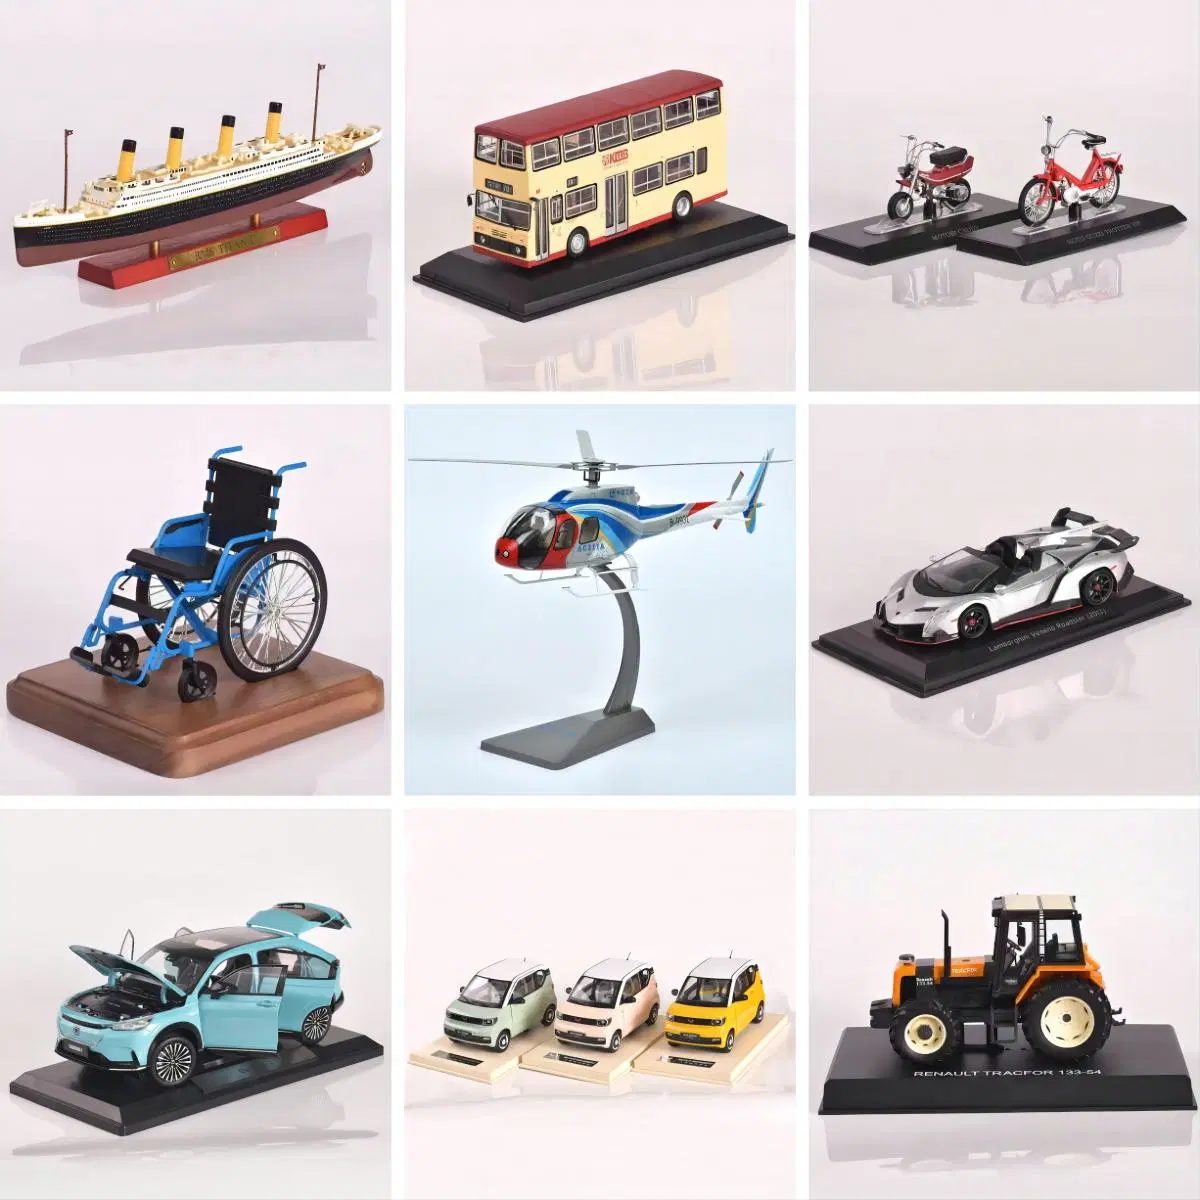 OEM Factory Customized Model Miniature Toys Wholesale Helicopter Price Scale Diecast Cars Tank Train Aircraft Die Cast Airplane Model Manufacturer in China